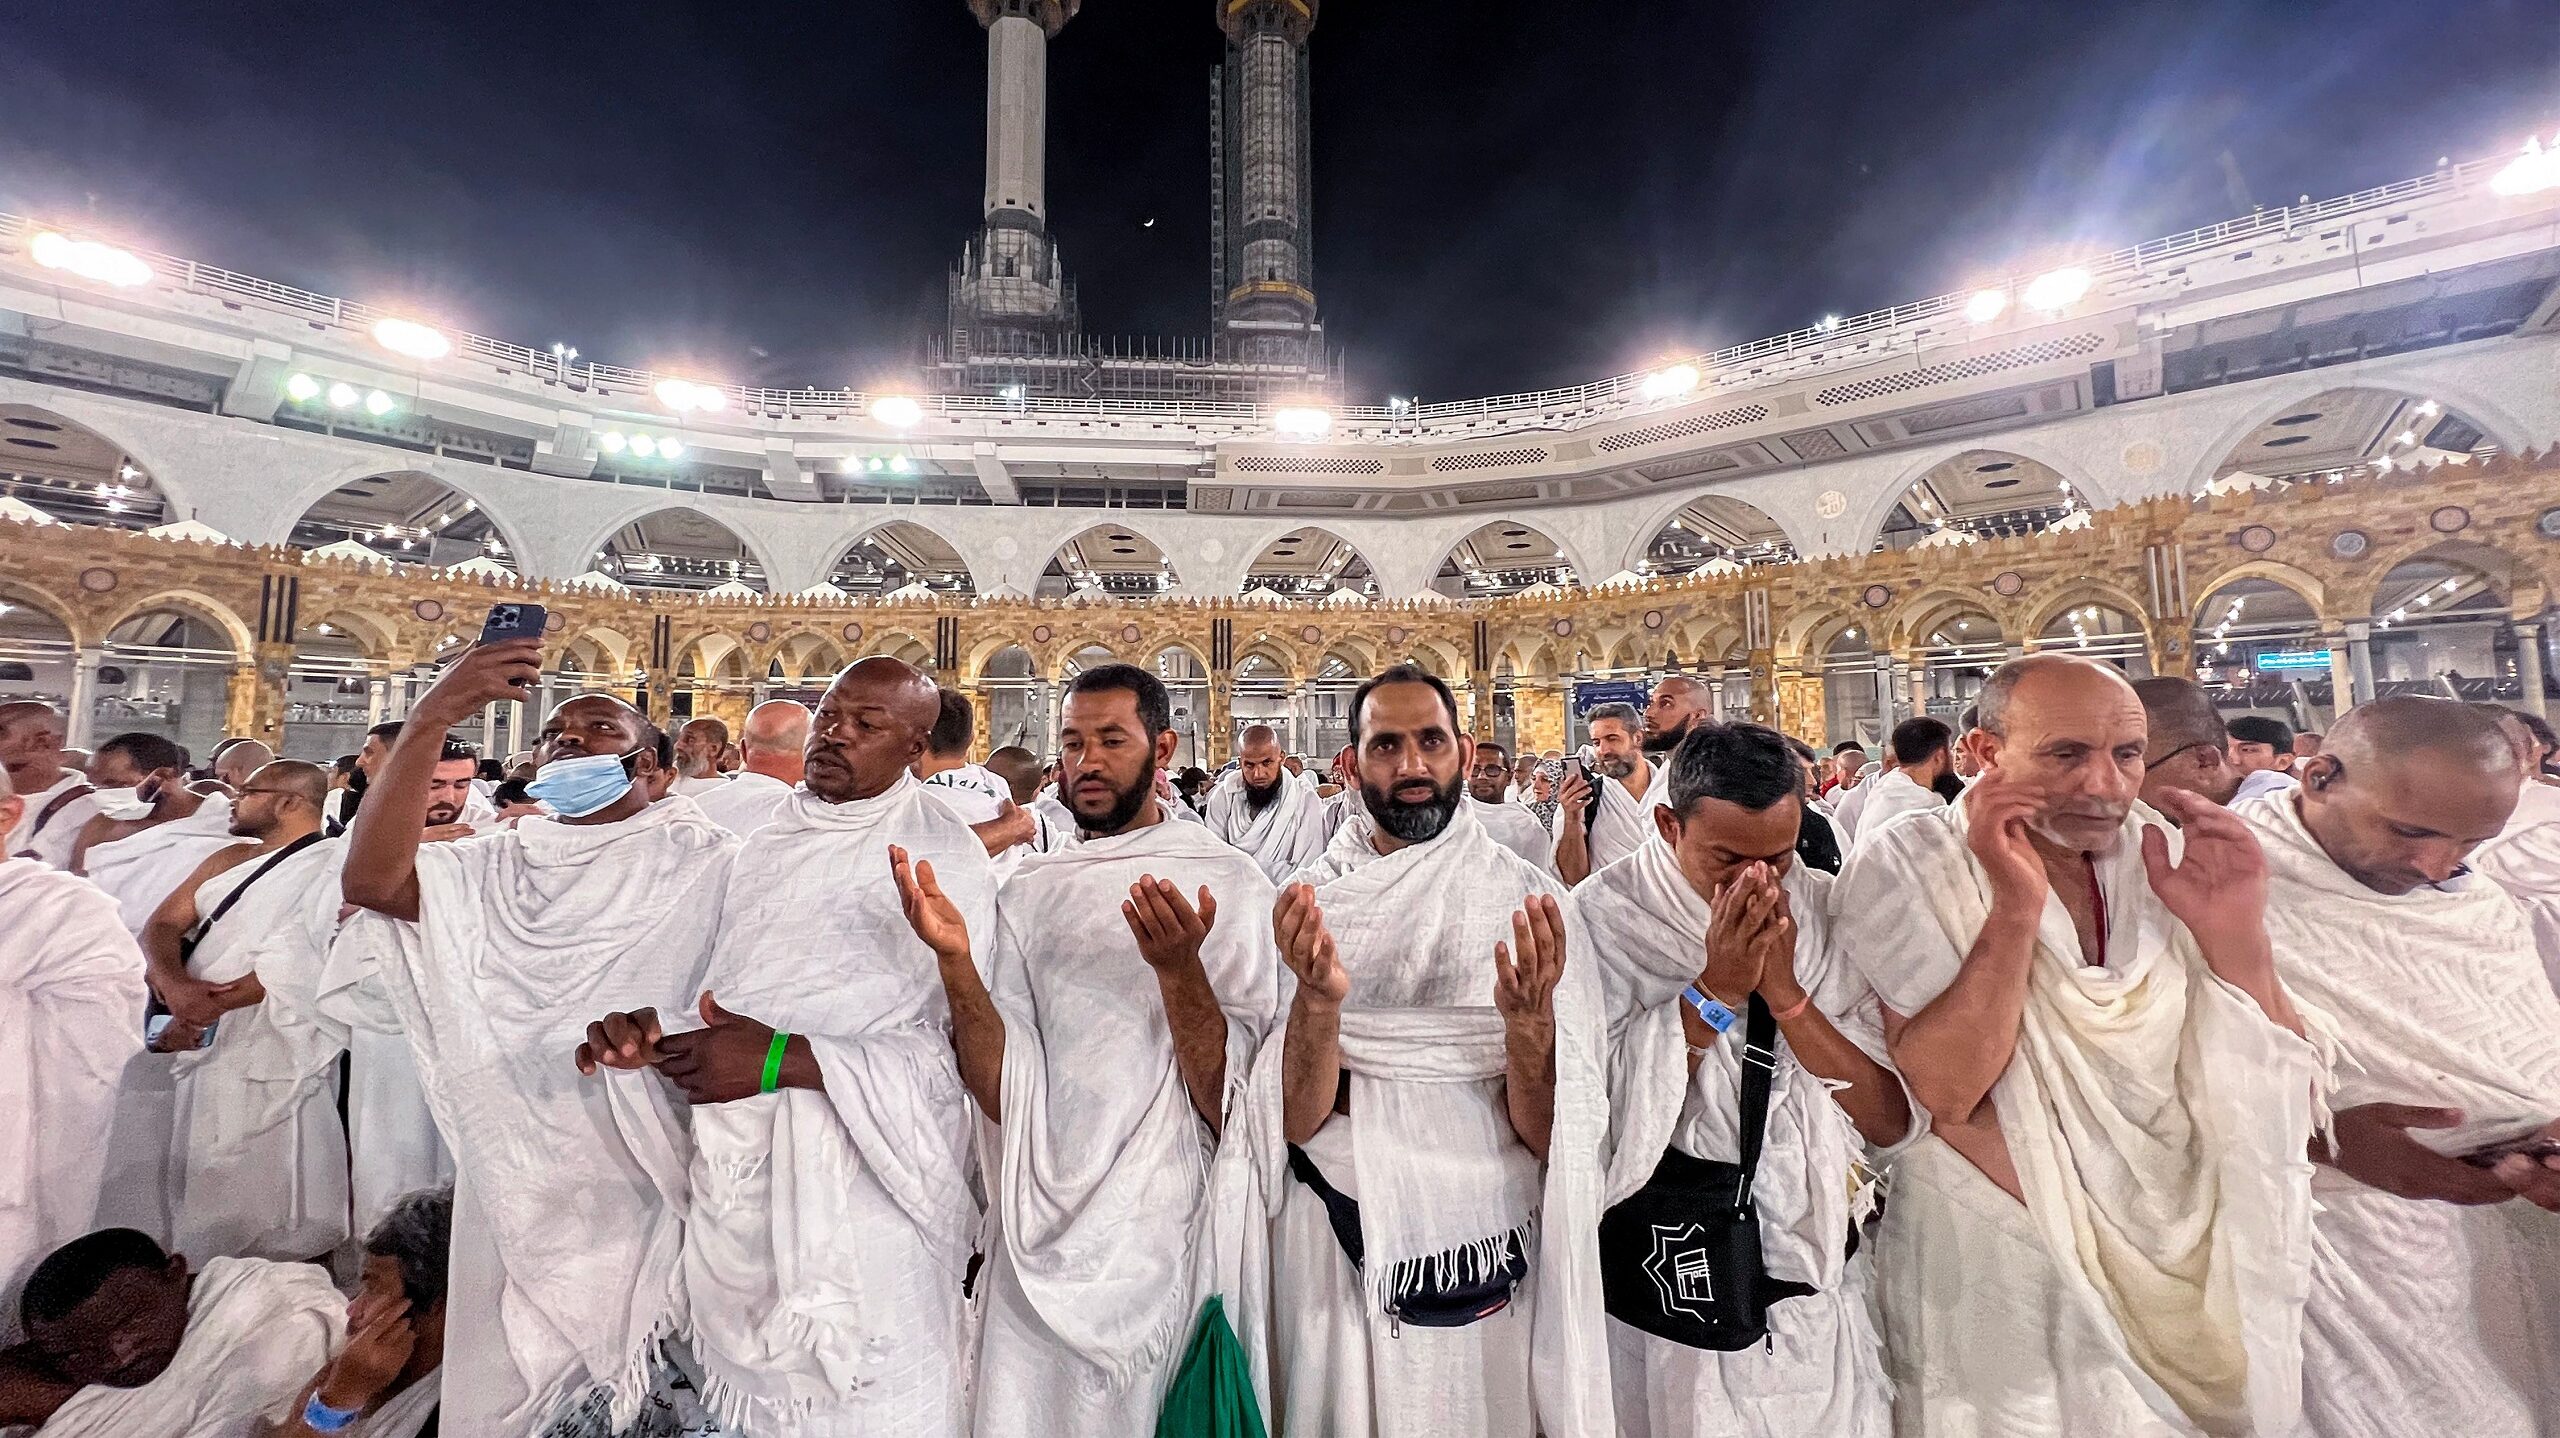 ‘She Has To Wait a Little Longer’: High Hajj Costs Force Families To Divide Pilgrimages